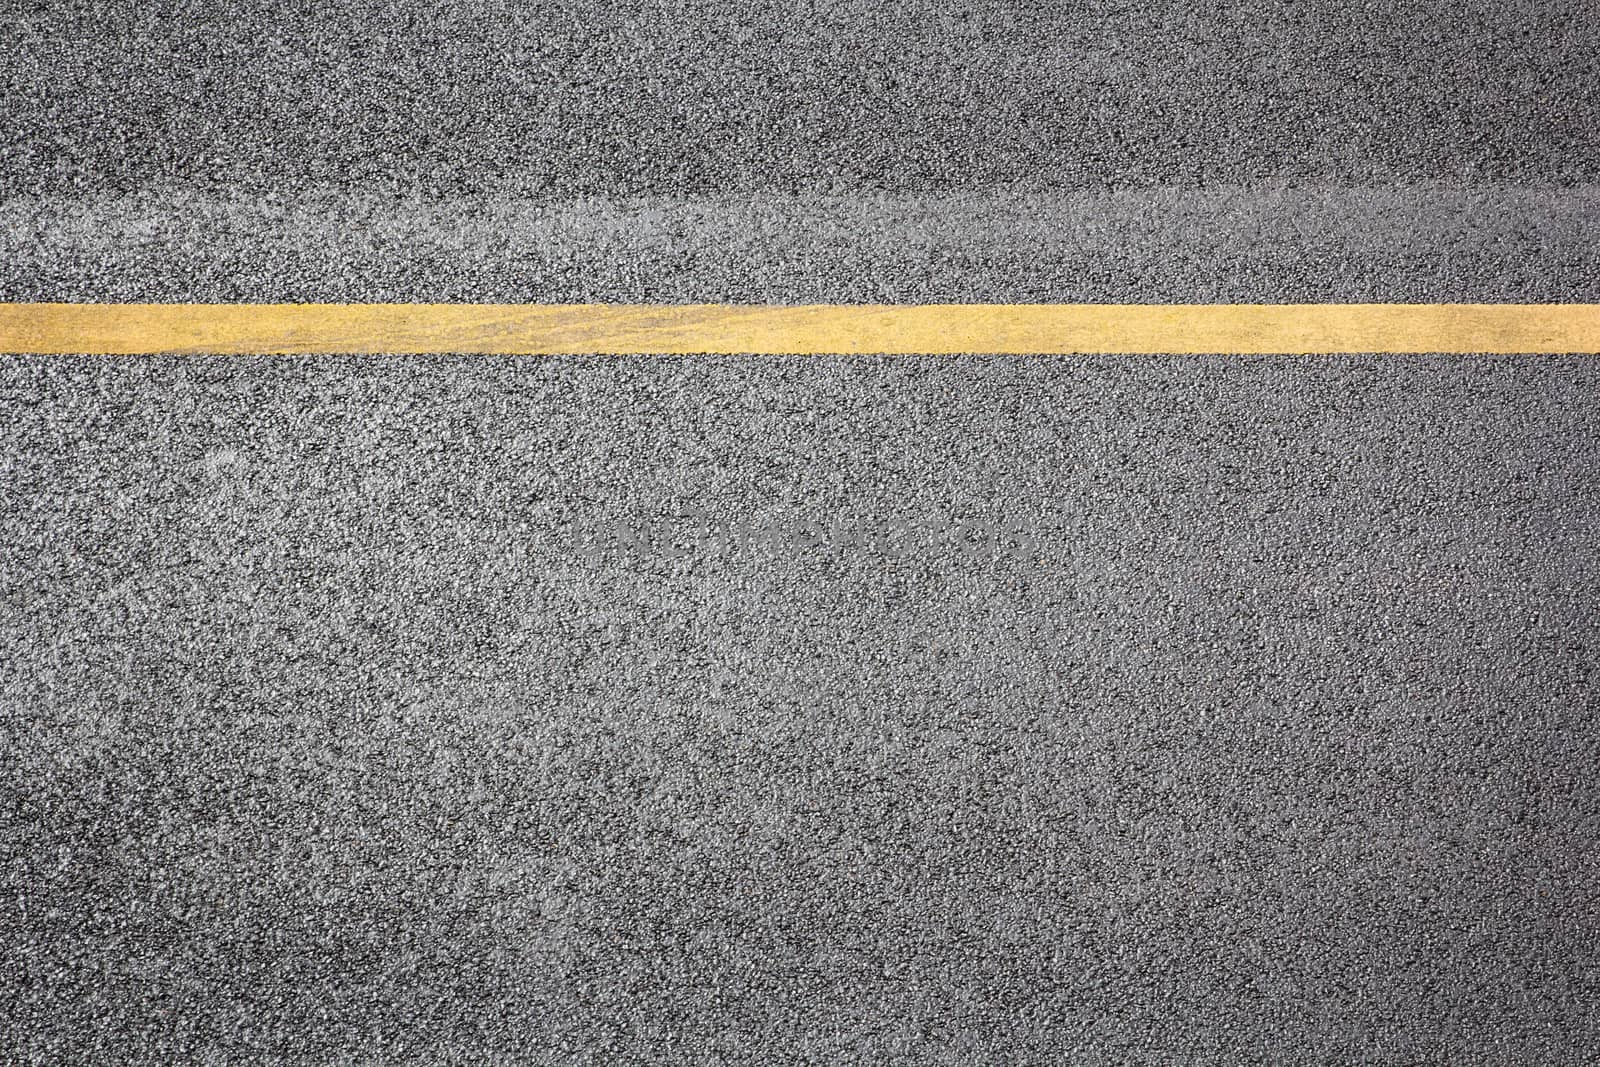 top view road highway surface with single yellow line asphalt backdrop